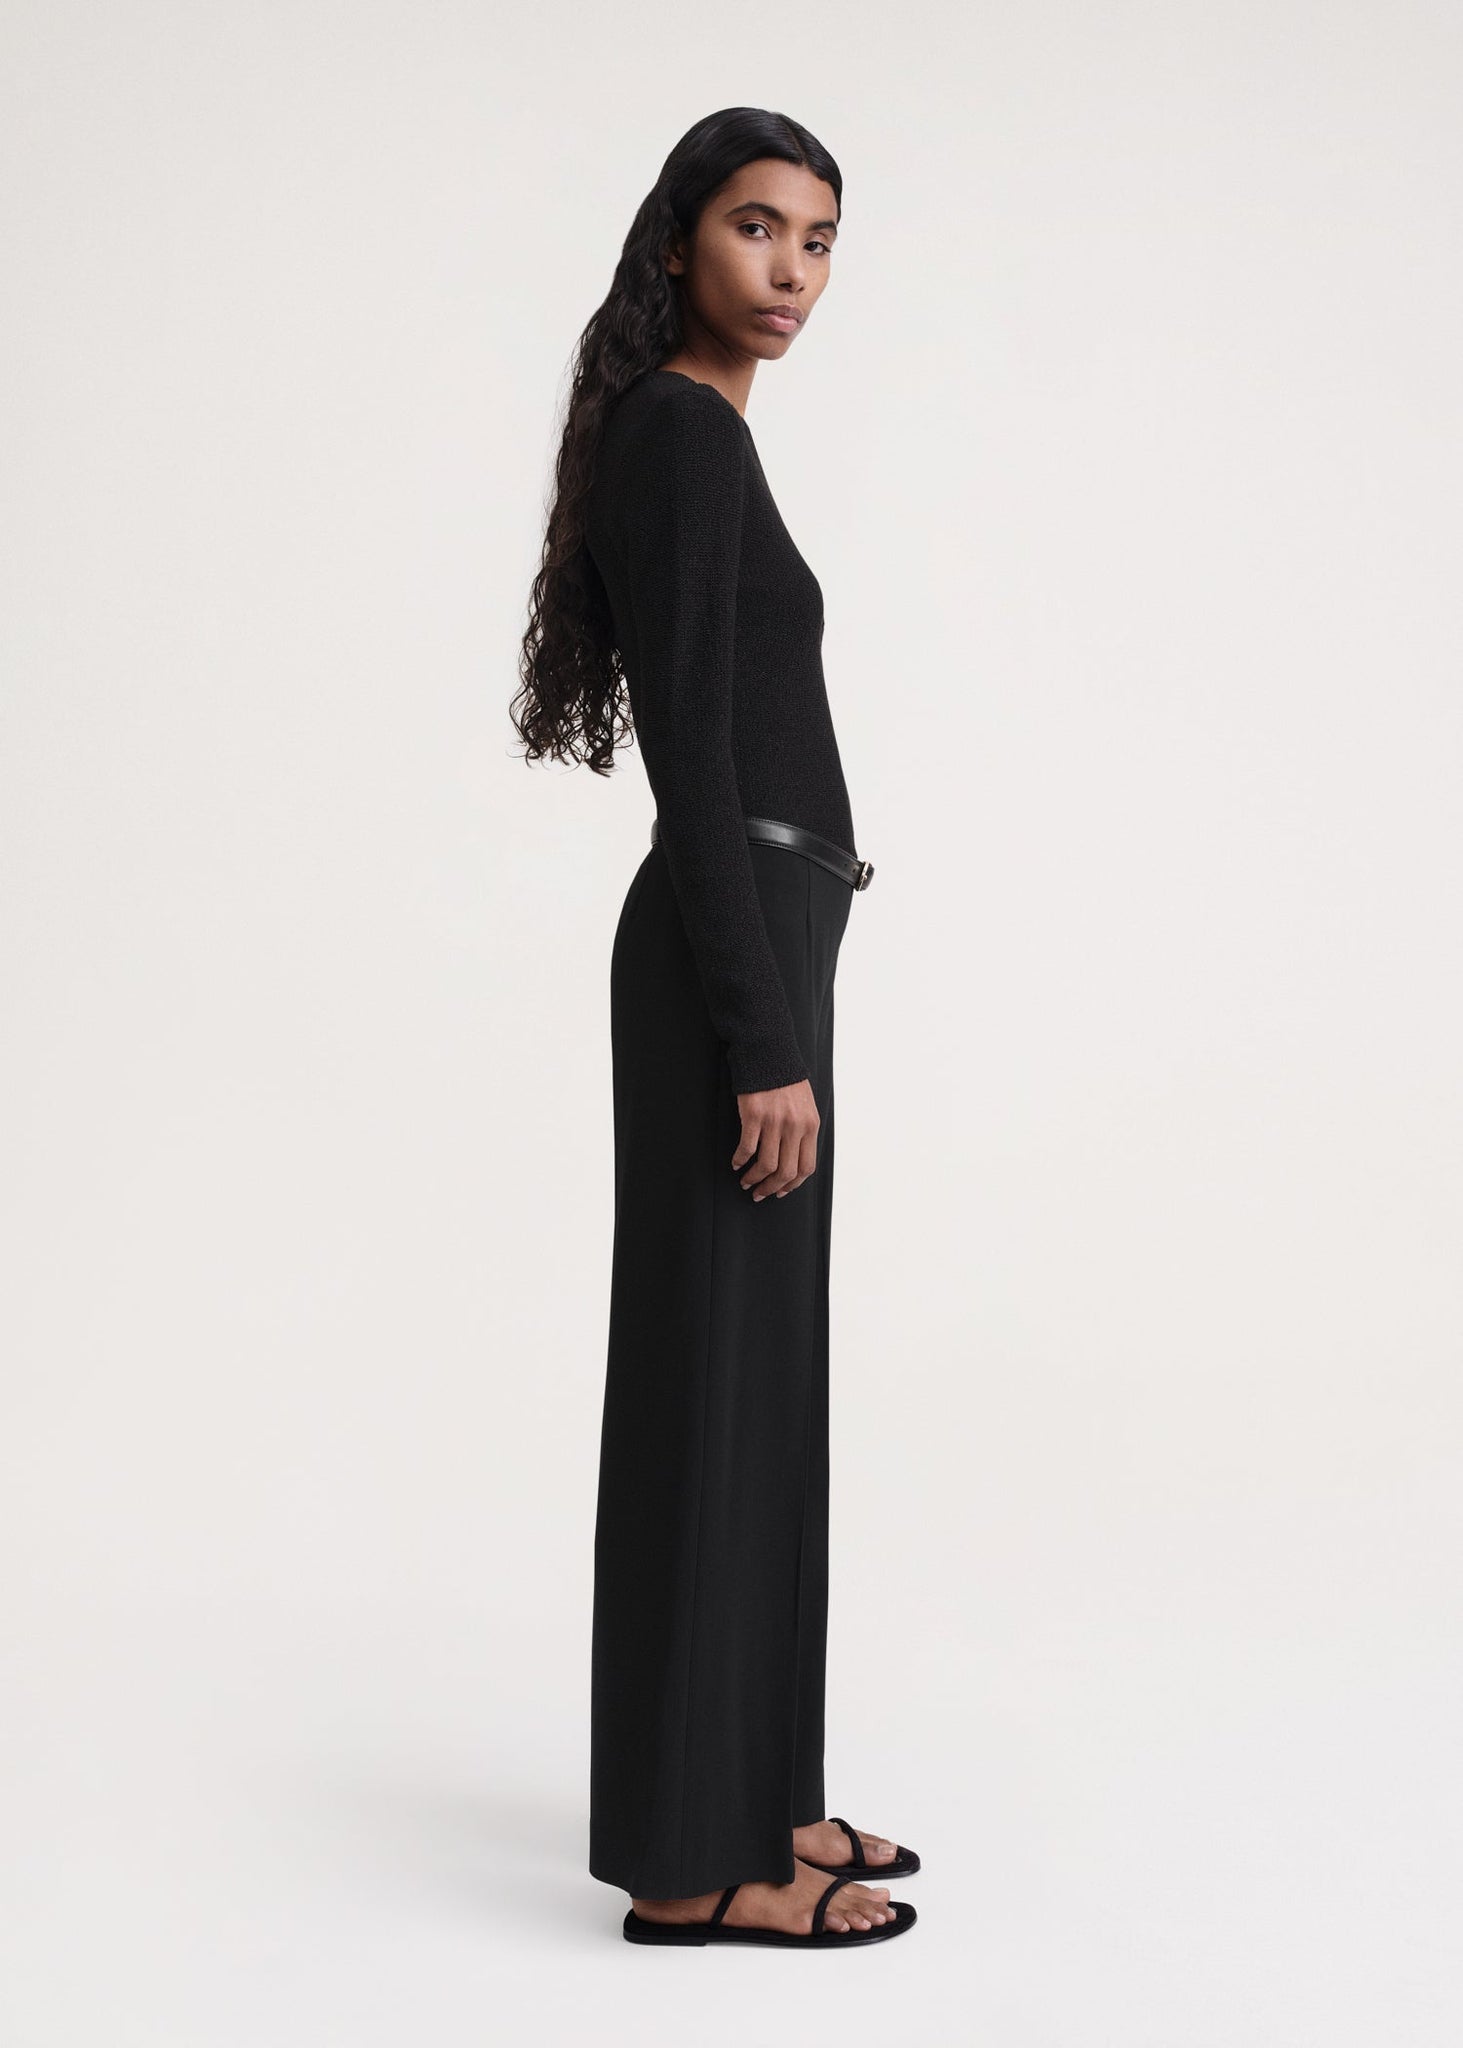 Clean wide trousers black